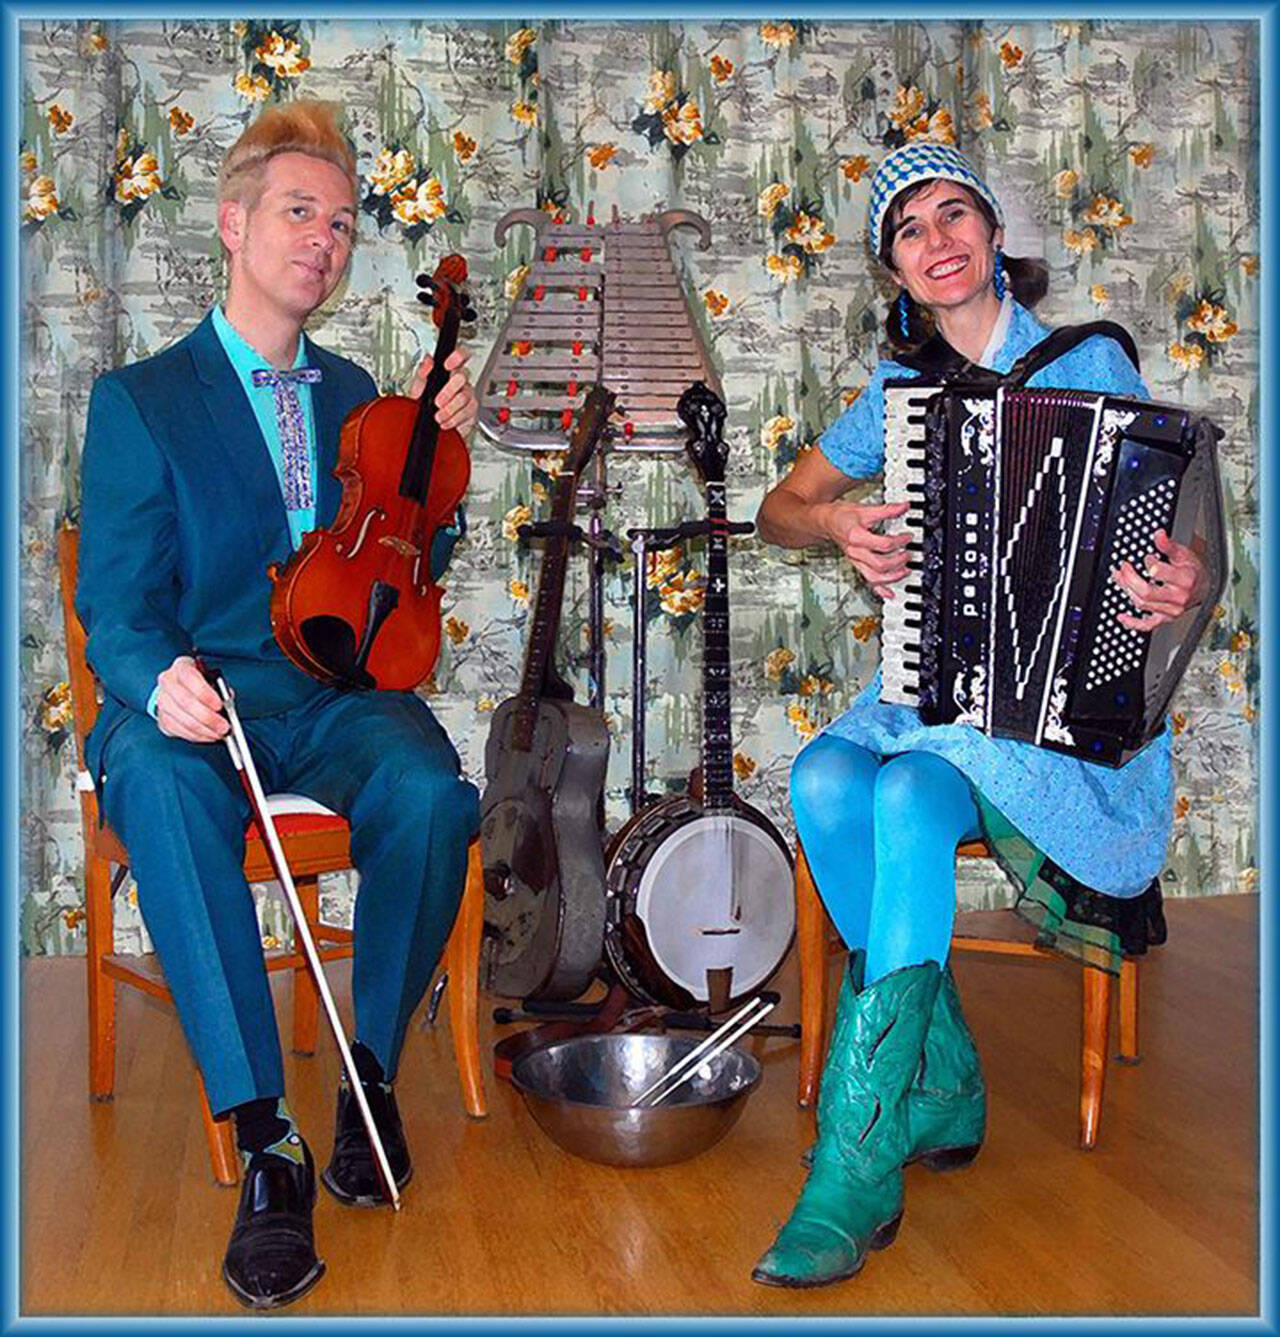 (Courtesy Photo) Seattle music duo Miles and Karina will perform a live, original score – featuring viola, banjo, guitars, accordian, glockenspiel and more – to accompany the 1926 silent film classic “Prince Achmed” at 7 p.m. Thursday, June 16, at Vashon Center for the Arts.